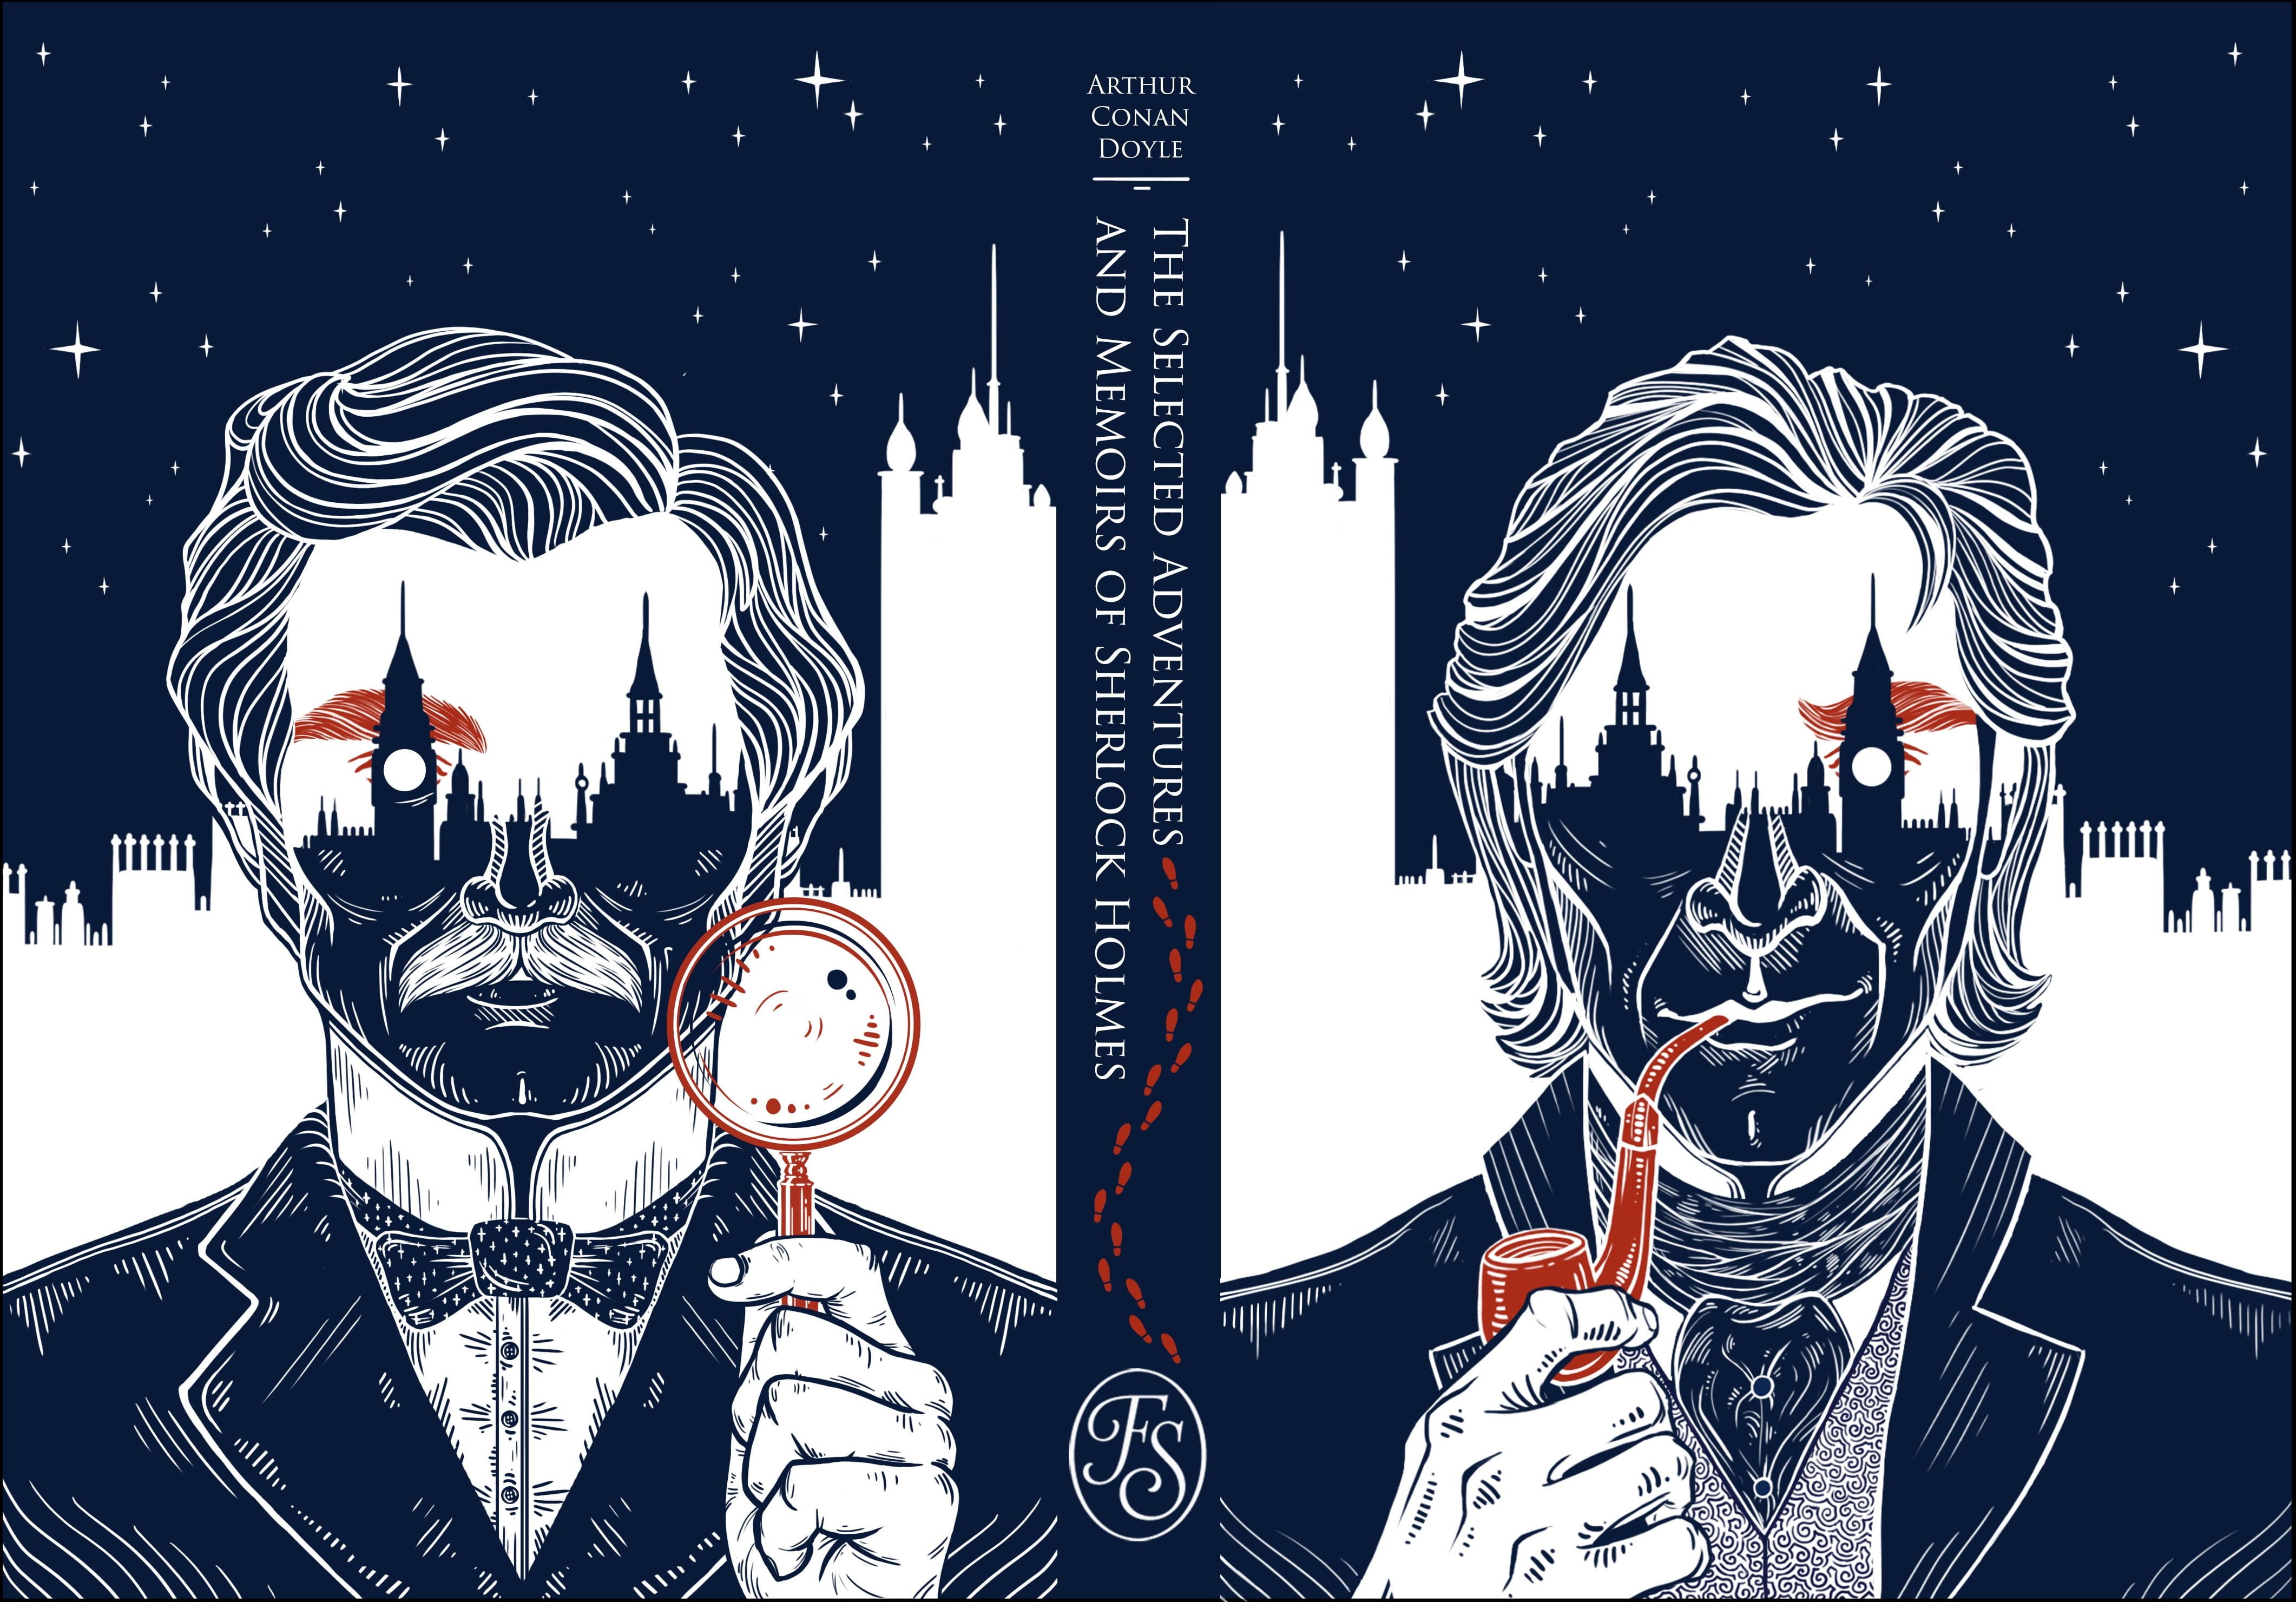 An illustration, a book cover design for 'The Selected Adventures and Memoirs of Sherlock Holmes', the back and front cover mirror a design of the outlines of Sherlock Holmes and Watson, imagery of London monuments are drawn into the background and over their faces.